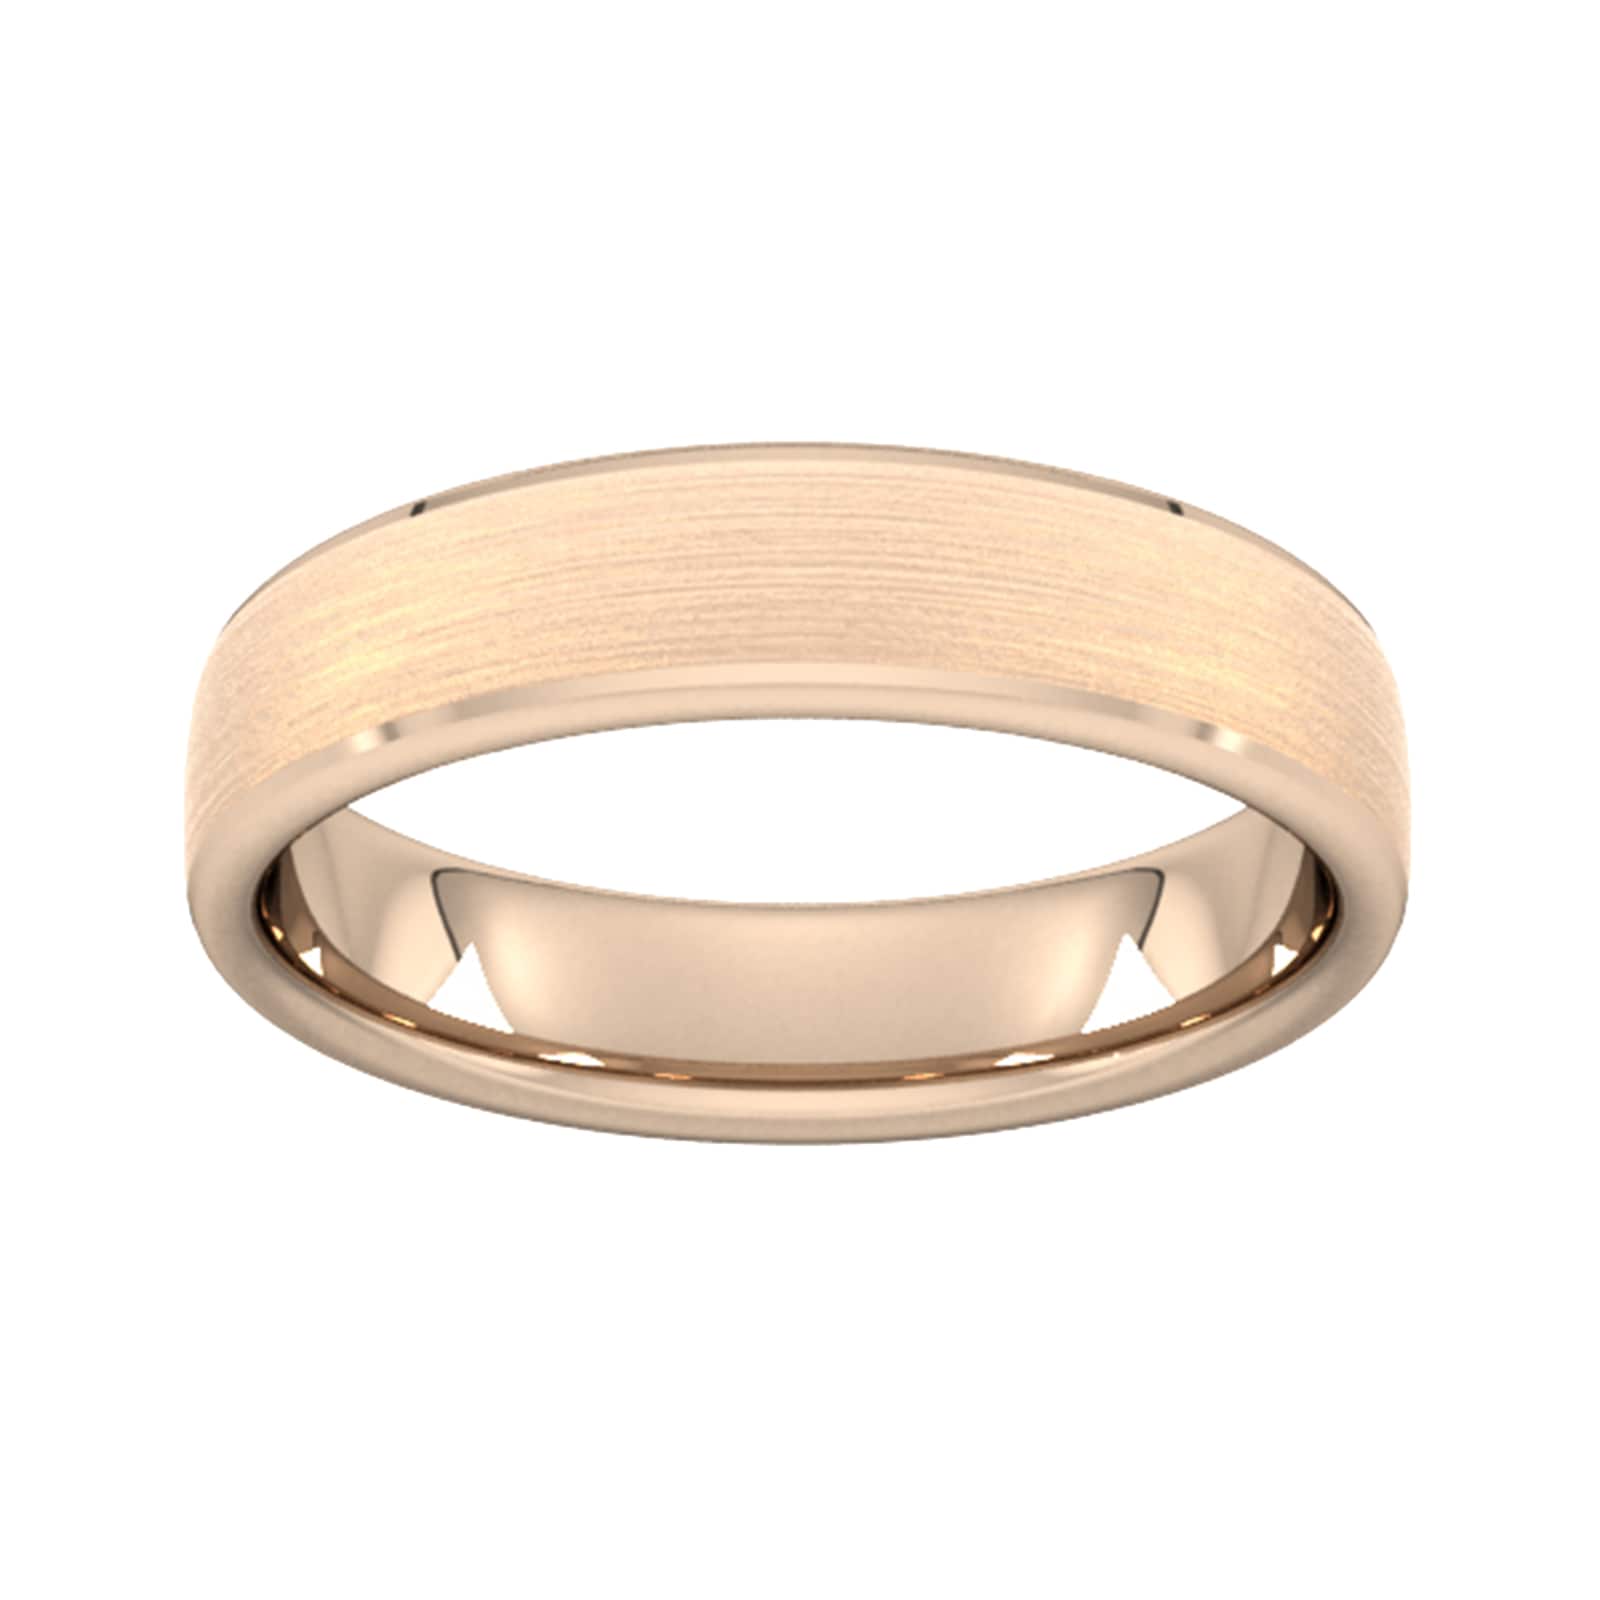 5mm Traditional Court Heavy Polished Chamfered Edges With Matt Centre Wedding Ring In 18 Carat Rose Gold - Ring Size Q